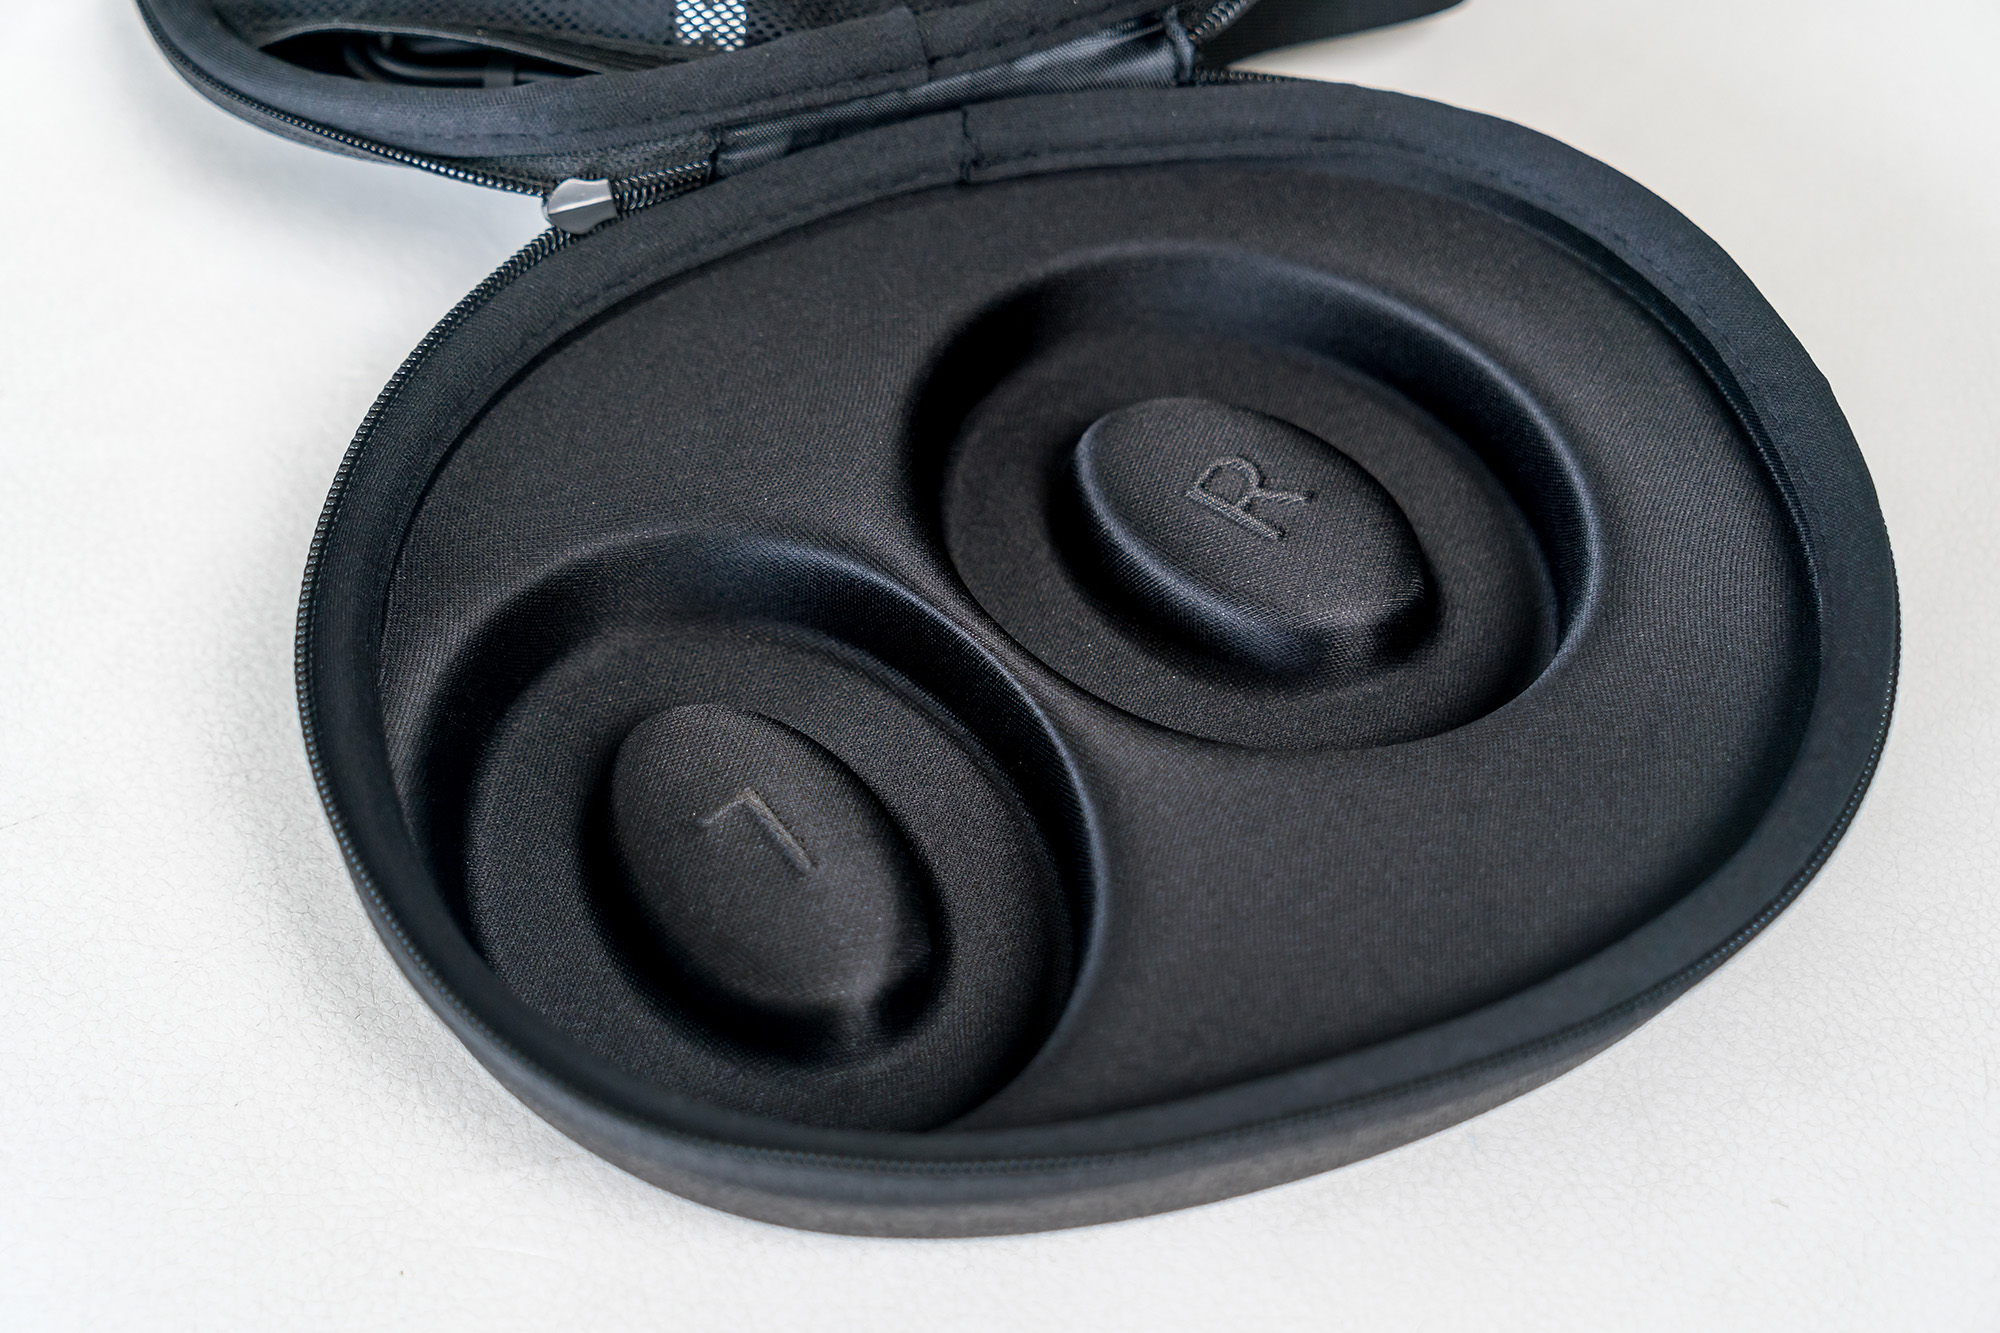 1More SonoFlow review: the benchmark for $100 wireless headphones